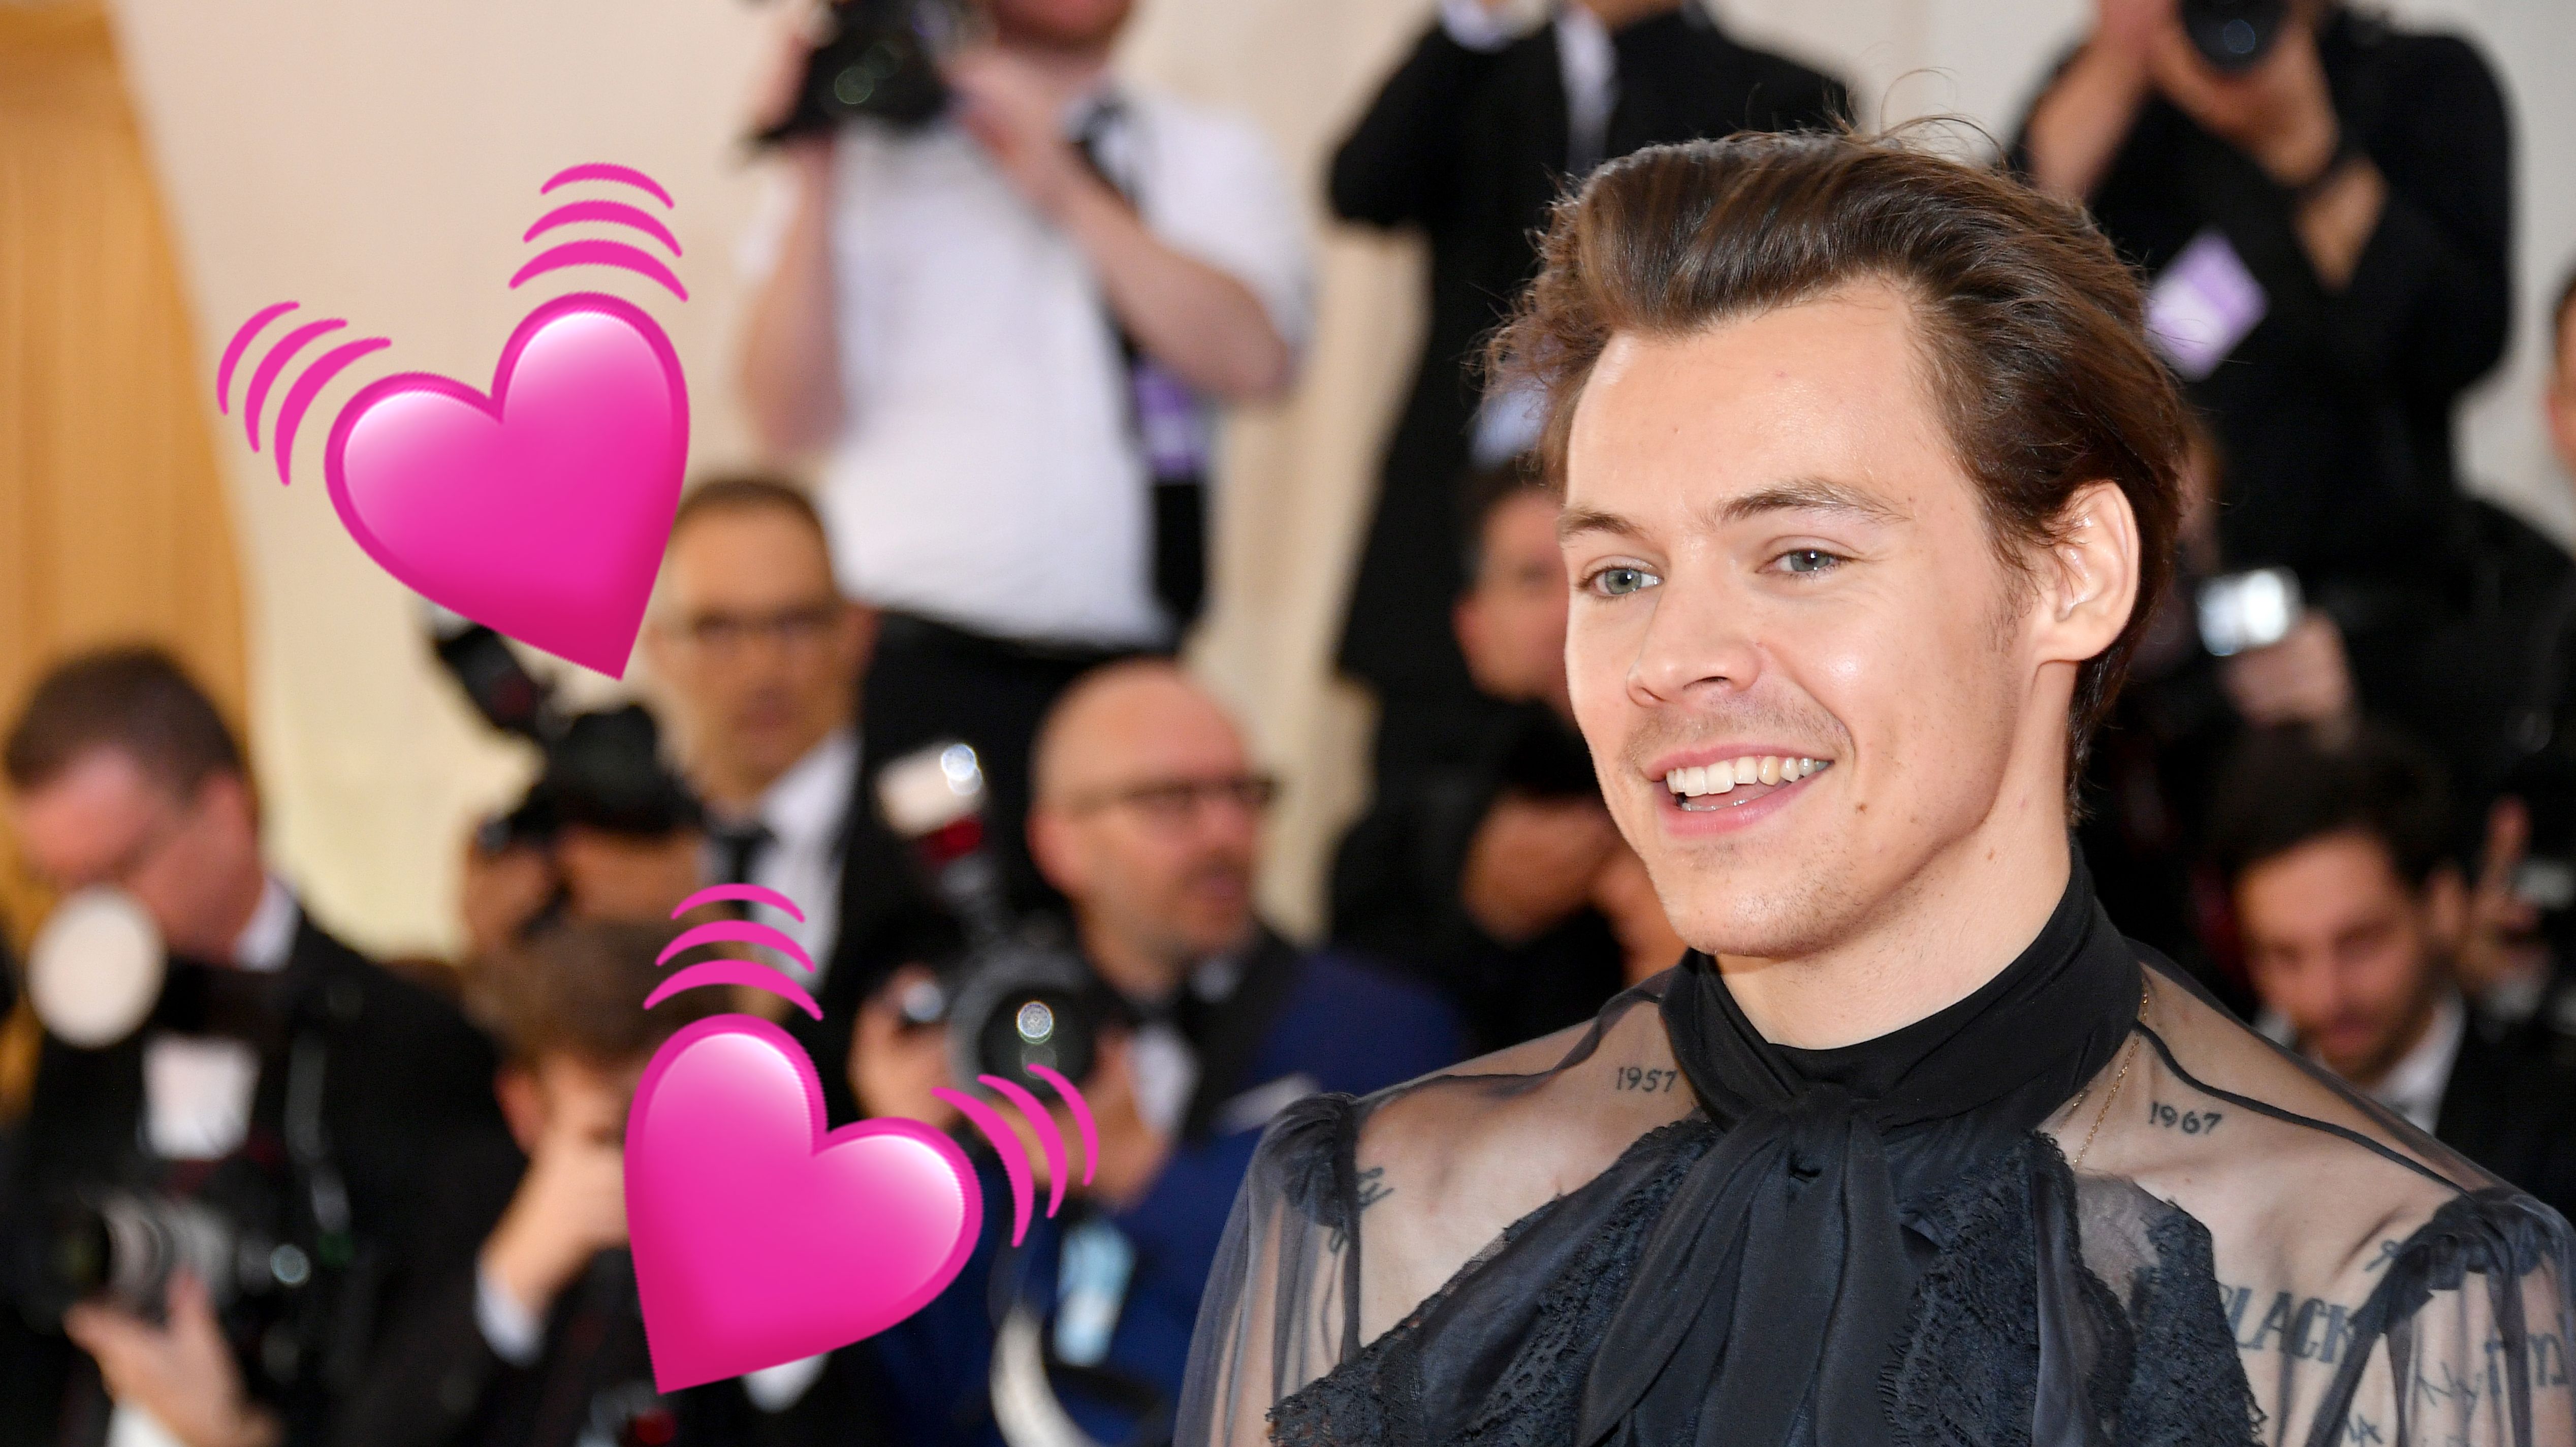 Harry Styles fashion through the years: From hoodies to Gucci